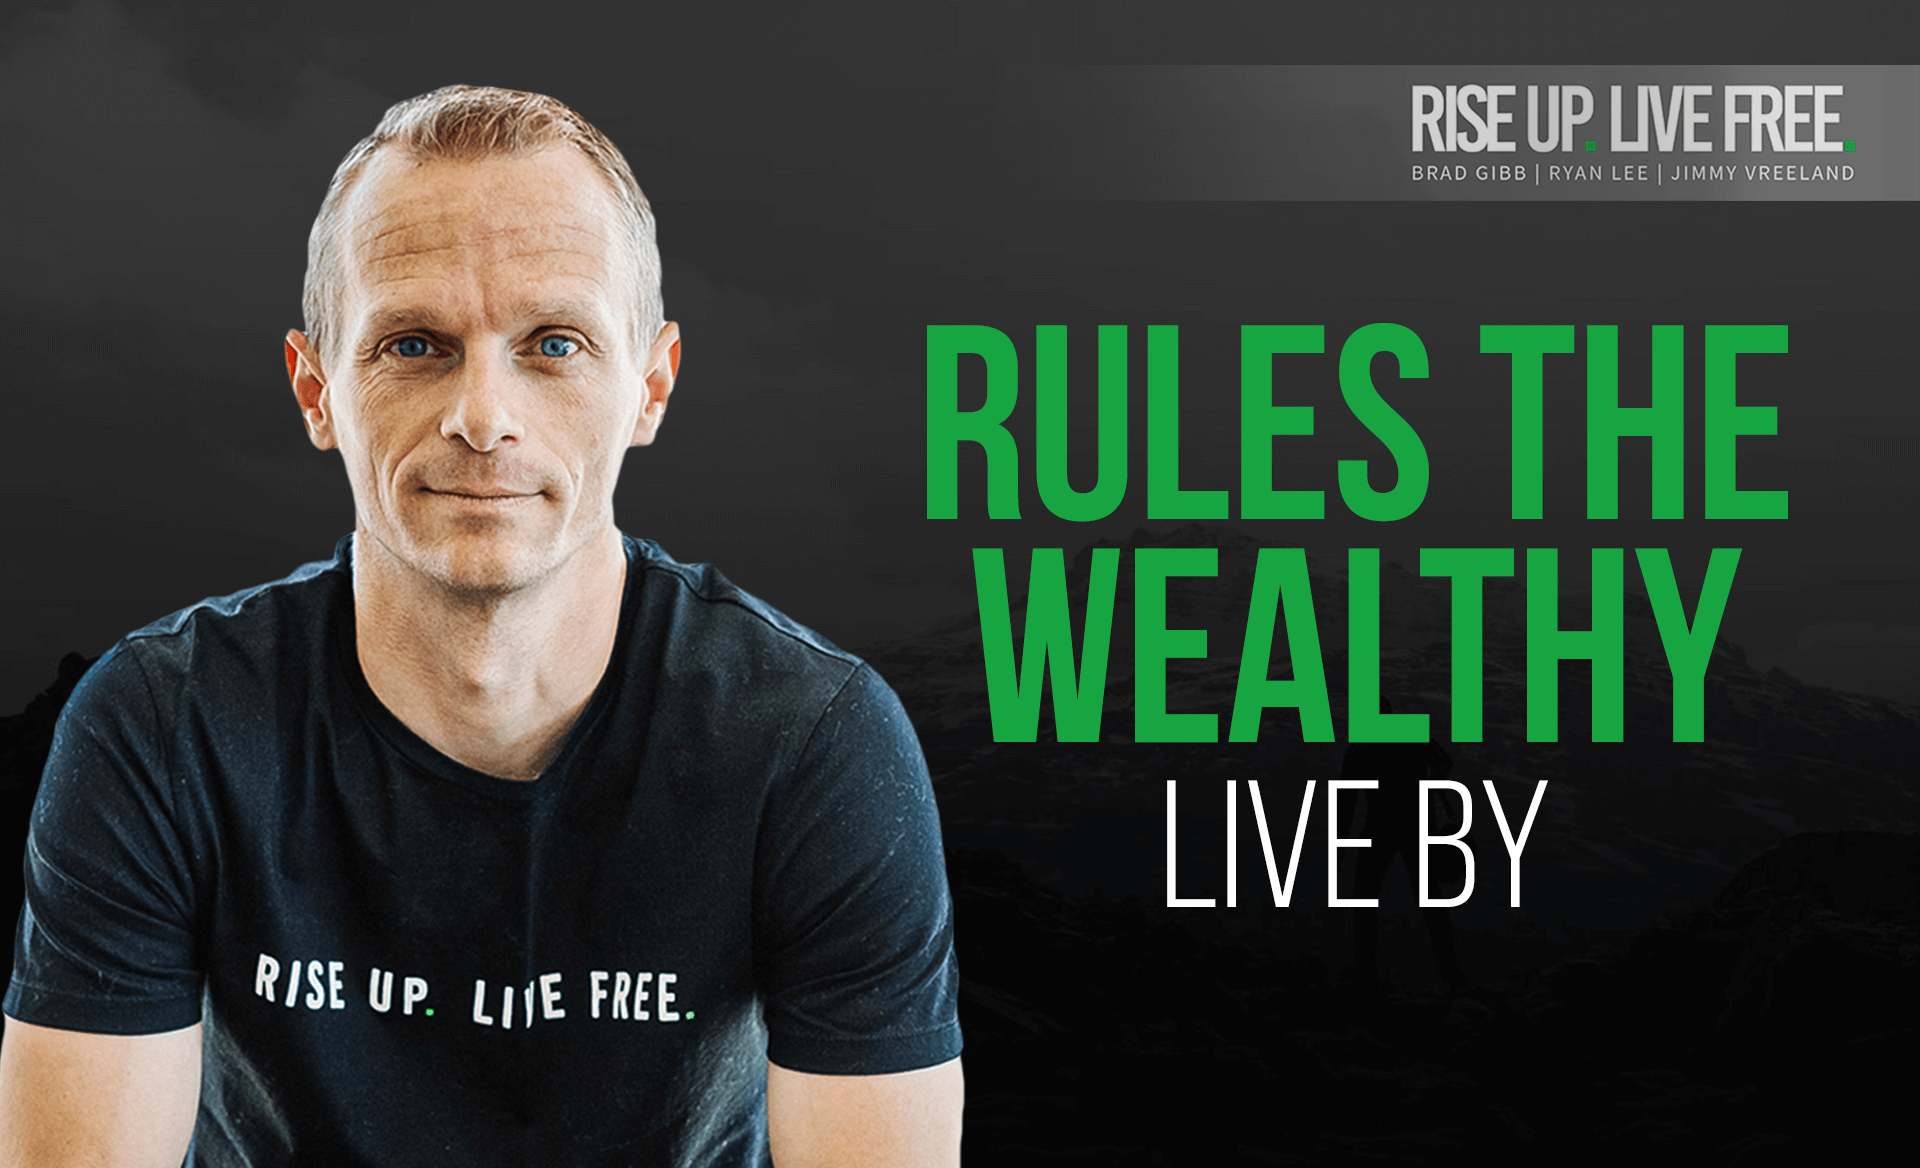 Rules the wealthy by